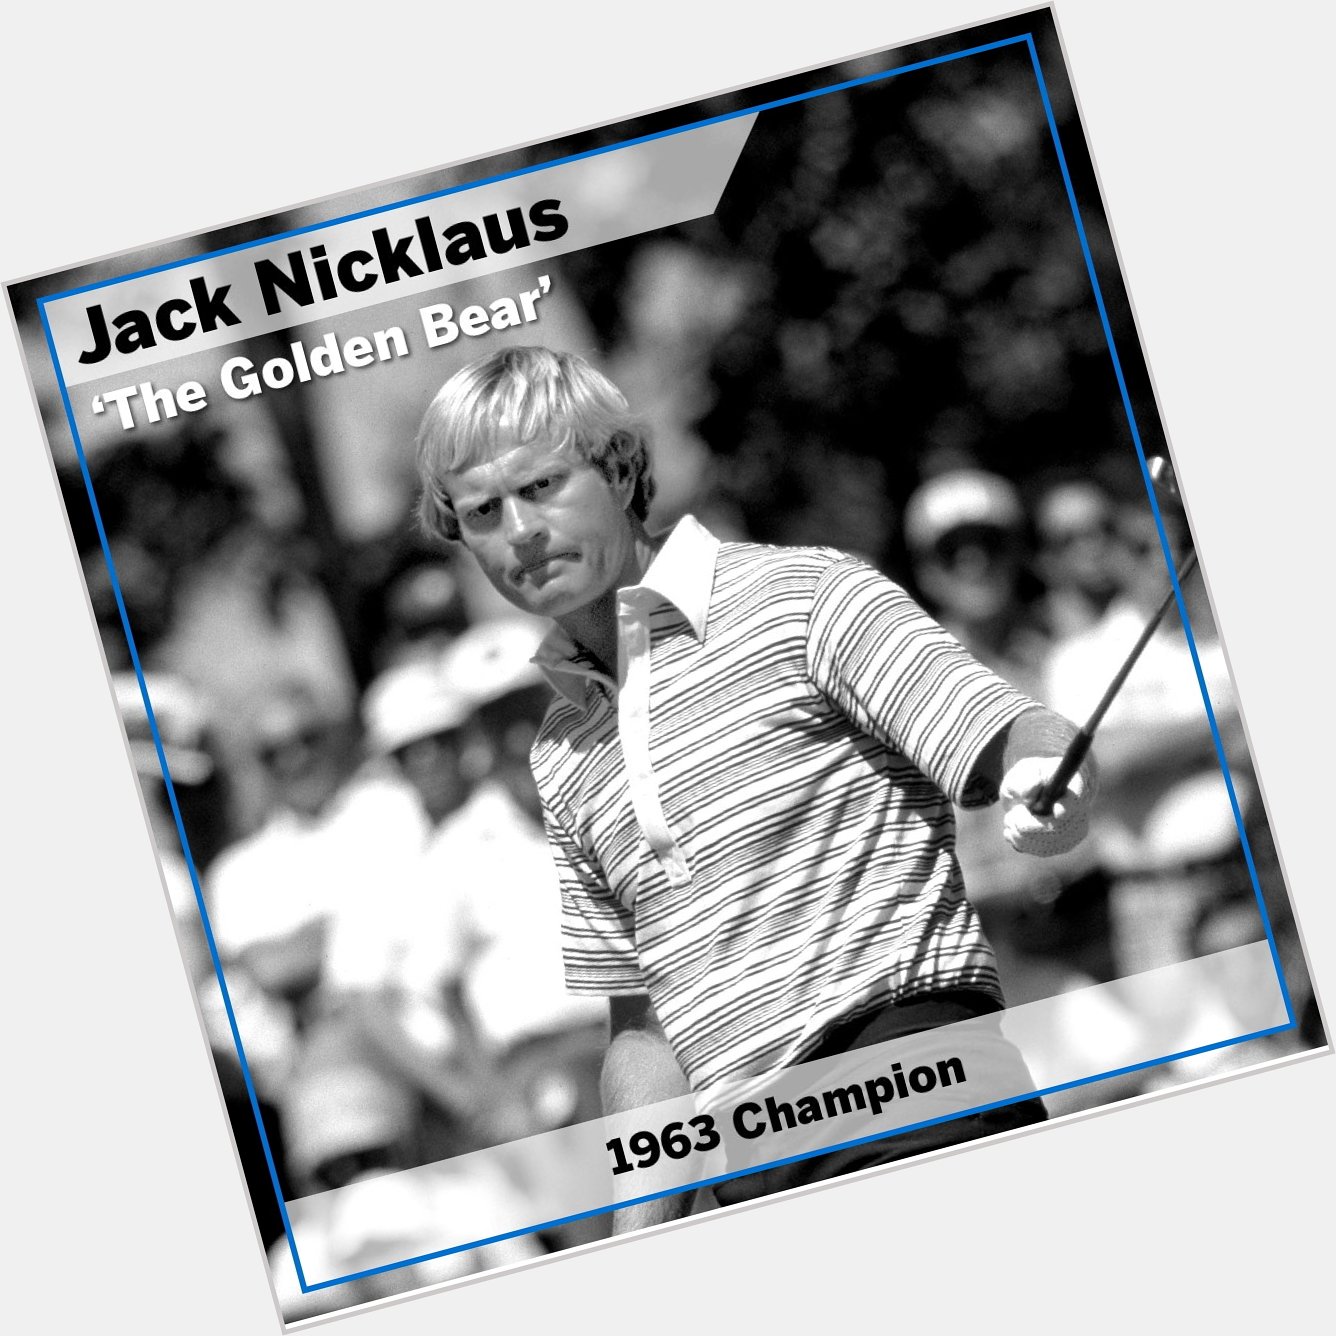 Happy Birthday to 1963 Champion and designer of one of three courses played during the event, Jack Nicklaus!   